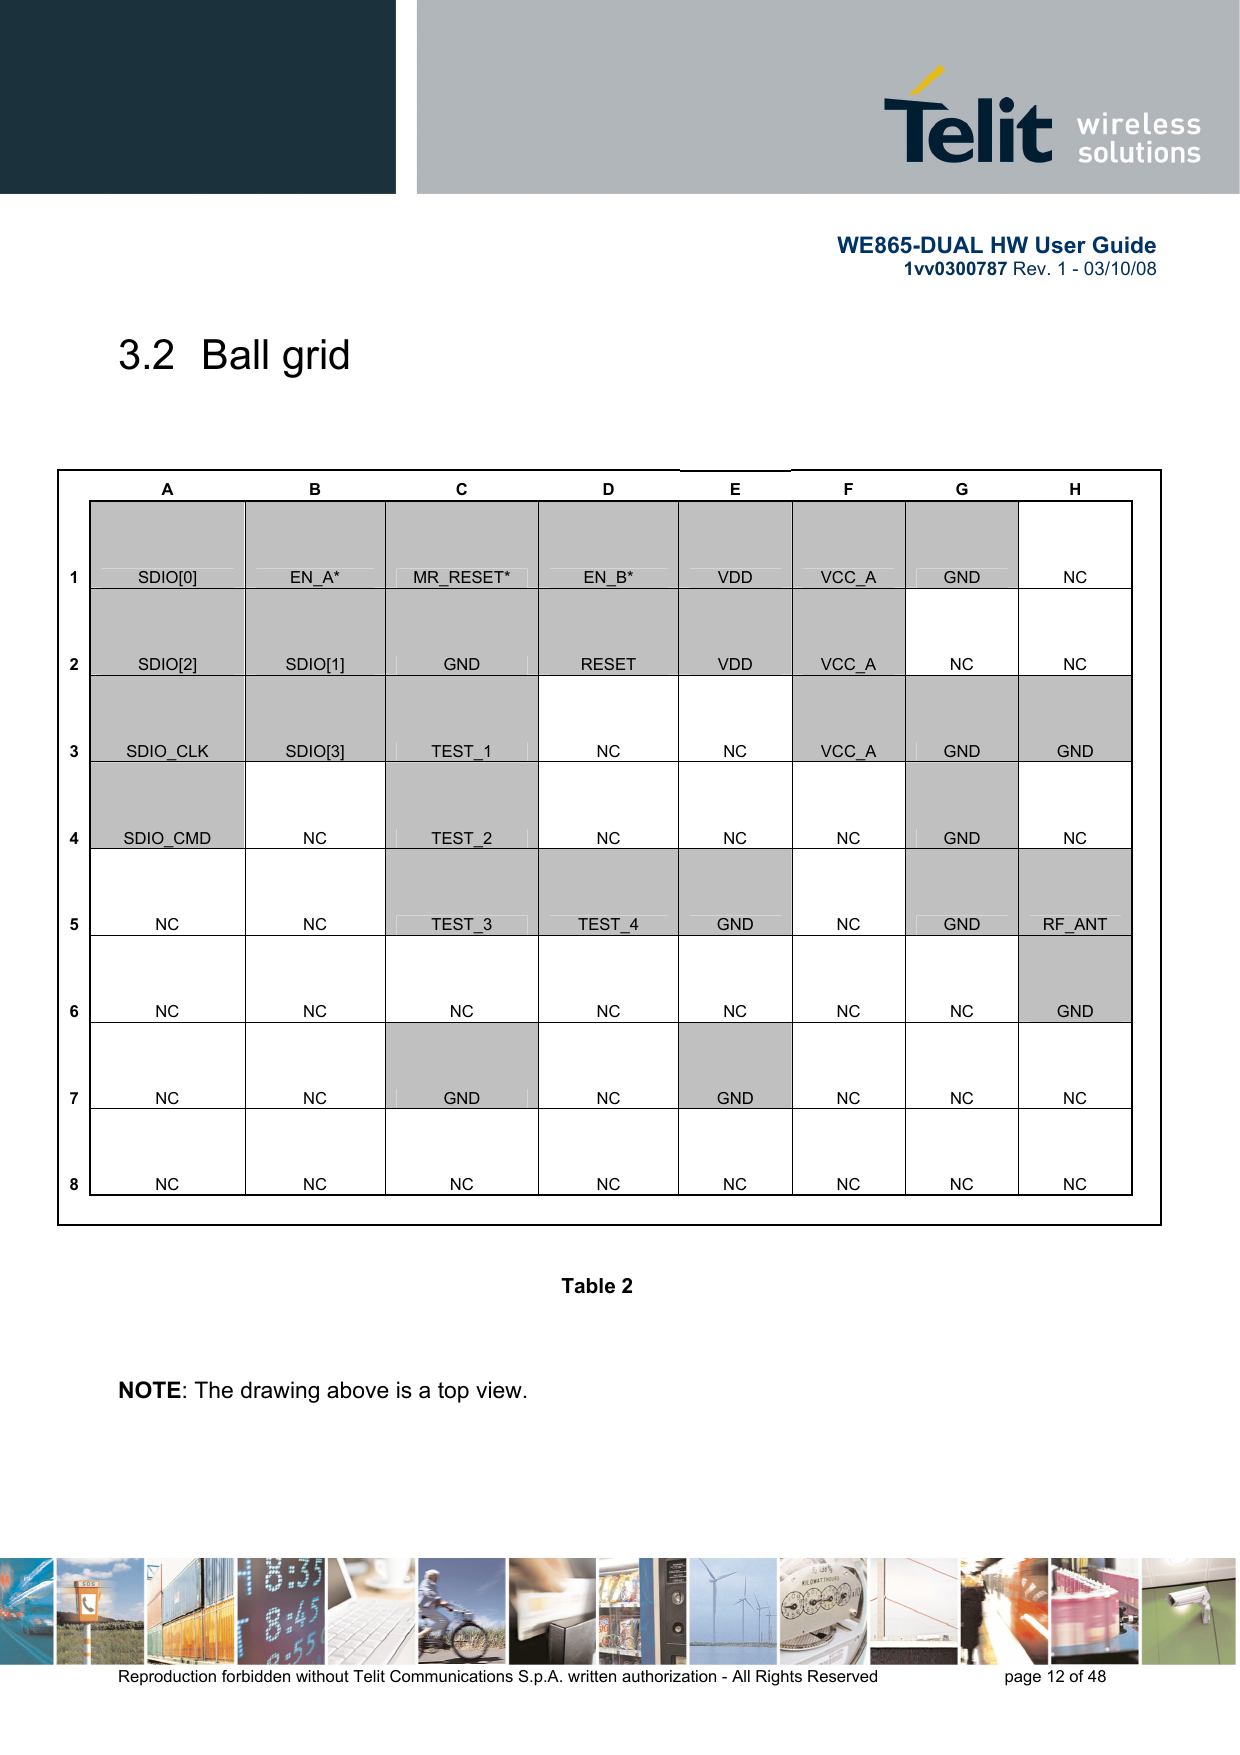       WE865-DUAL HW User Guide 1vv0300787 Rev. 1 - 03/10/08      Reproduction forbidden without Telit Communications S.p.A. written authorization - All Rights Reserved    page 12 of 48  3.2  Ball grid       A  B  C  D  E  F  G  H    1  SDIO[0]  EN_A*  MR_RESET*  EN_B*  VDD  VCC_A  GND NC   2  SDIO[2]  SDIO[1]  GND  RESET  VDD  VCC_A NC  NC    3  SDIO_CLK  SDIO[3]  TEST_1  NC  NC  VCC_A  GND  GND    4  SDIO_CMD  NC  TEST_2  NC  NC  NC  GND  NC    5  NC   NC  TEST_3  TEST_4  GND  NC  GND  RF_ANT    6  NC  NC  NC  NC  NC  NC  NC  GND    7  NC NC GND  NC  GND  NC  NC NC   8  NC  NC NC NC NC NC NC NC                                     Table 2                                                    NOTE: The drawing above is a top view. 